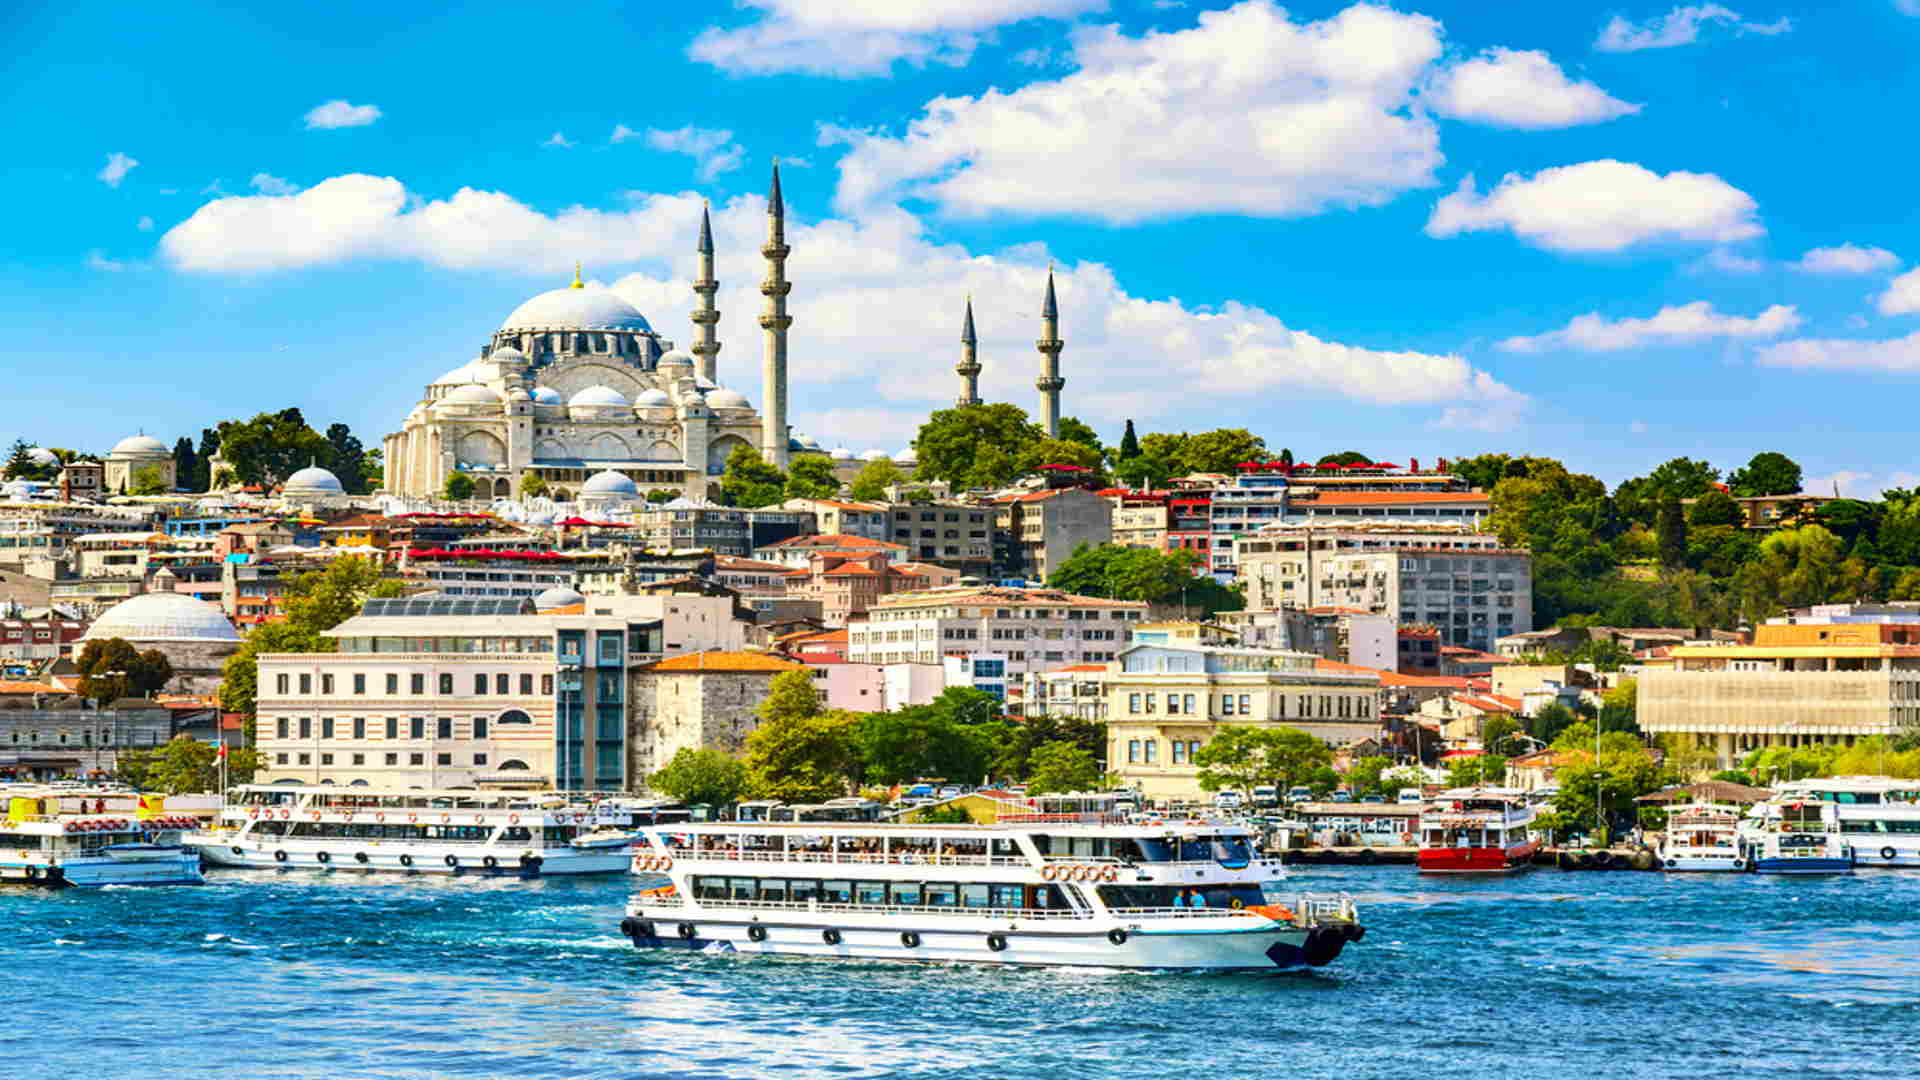 5 Days in Istanbul on a Budget